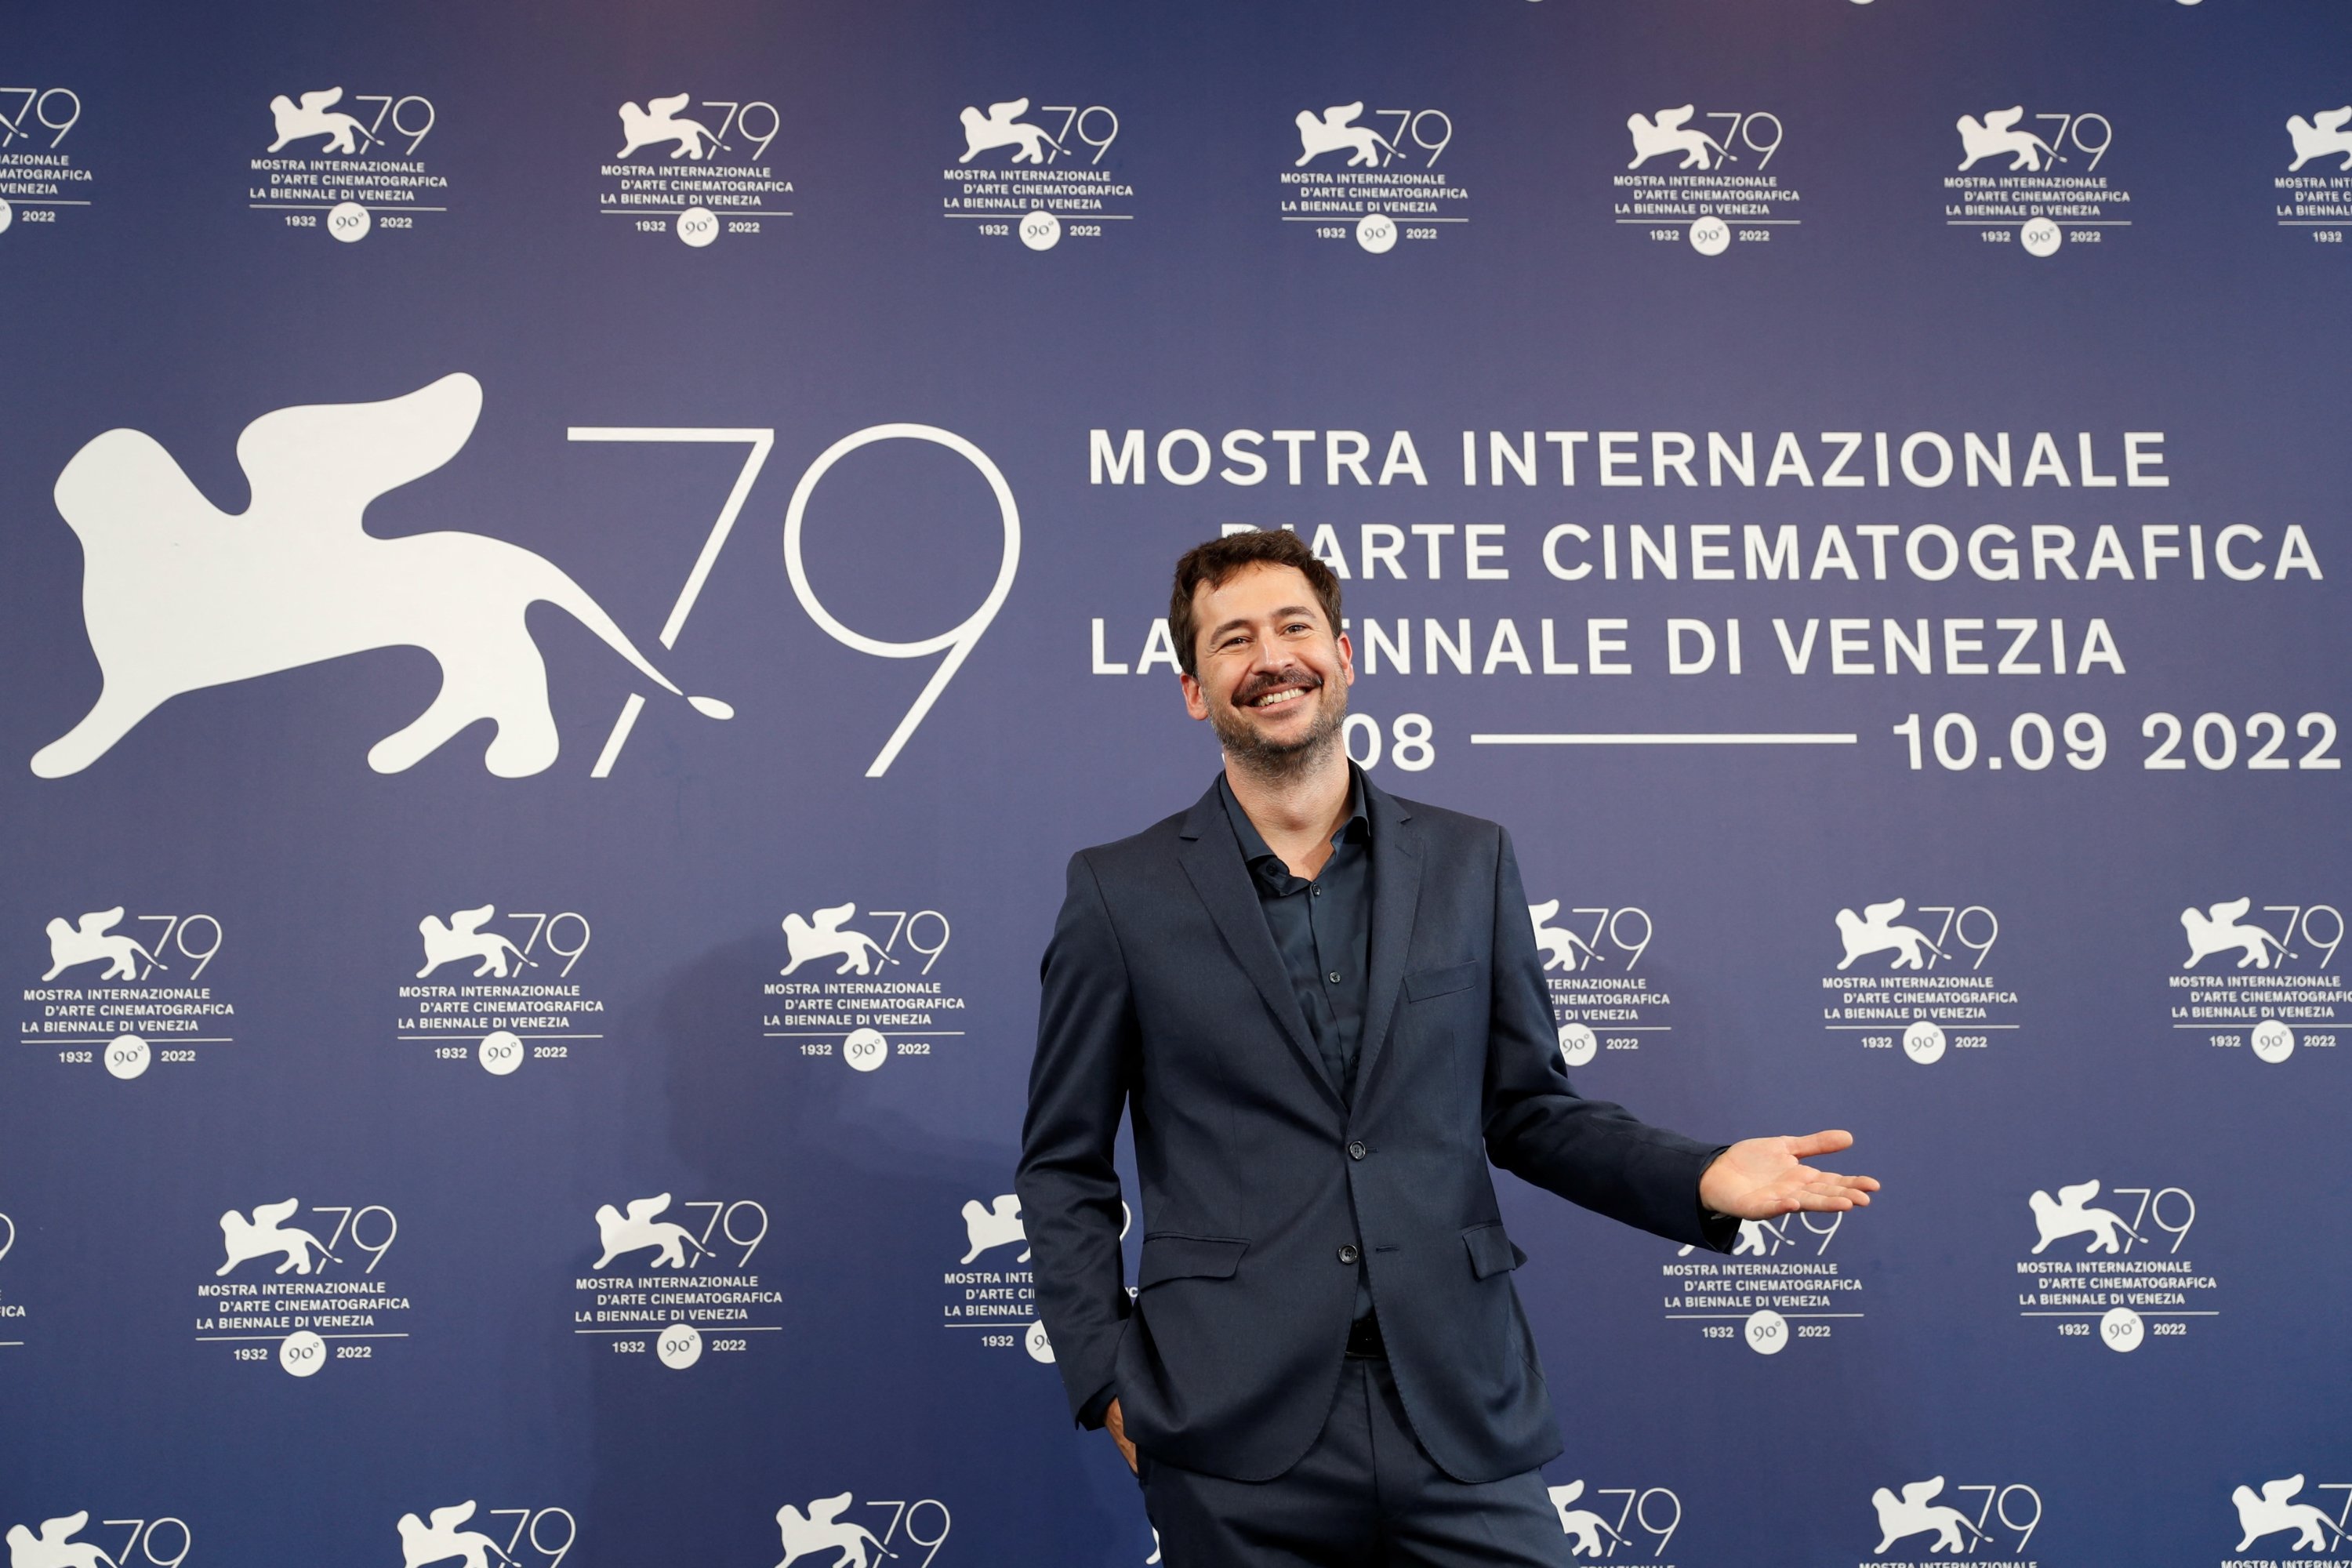 Director Santiago Mitre poses at the 79th Venice Film Festival during a photo call for the film 